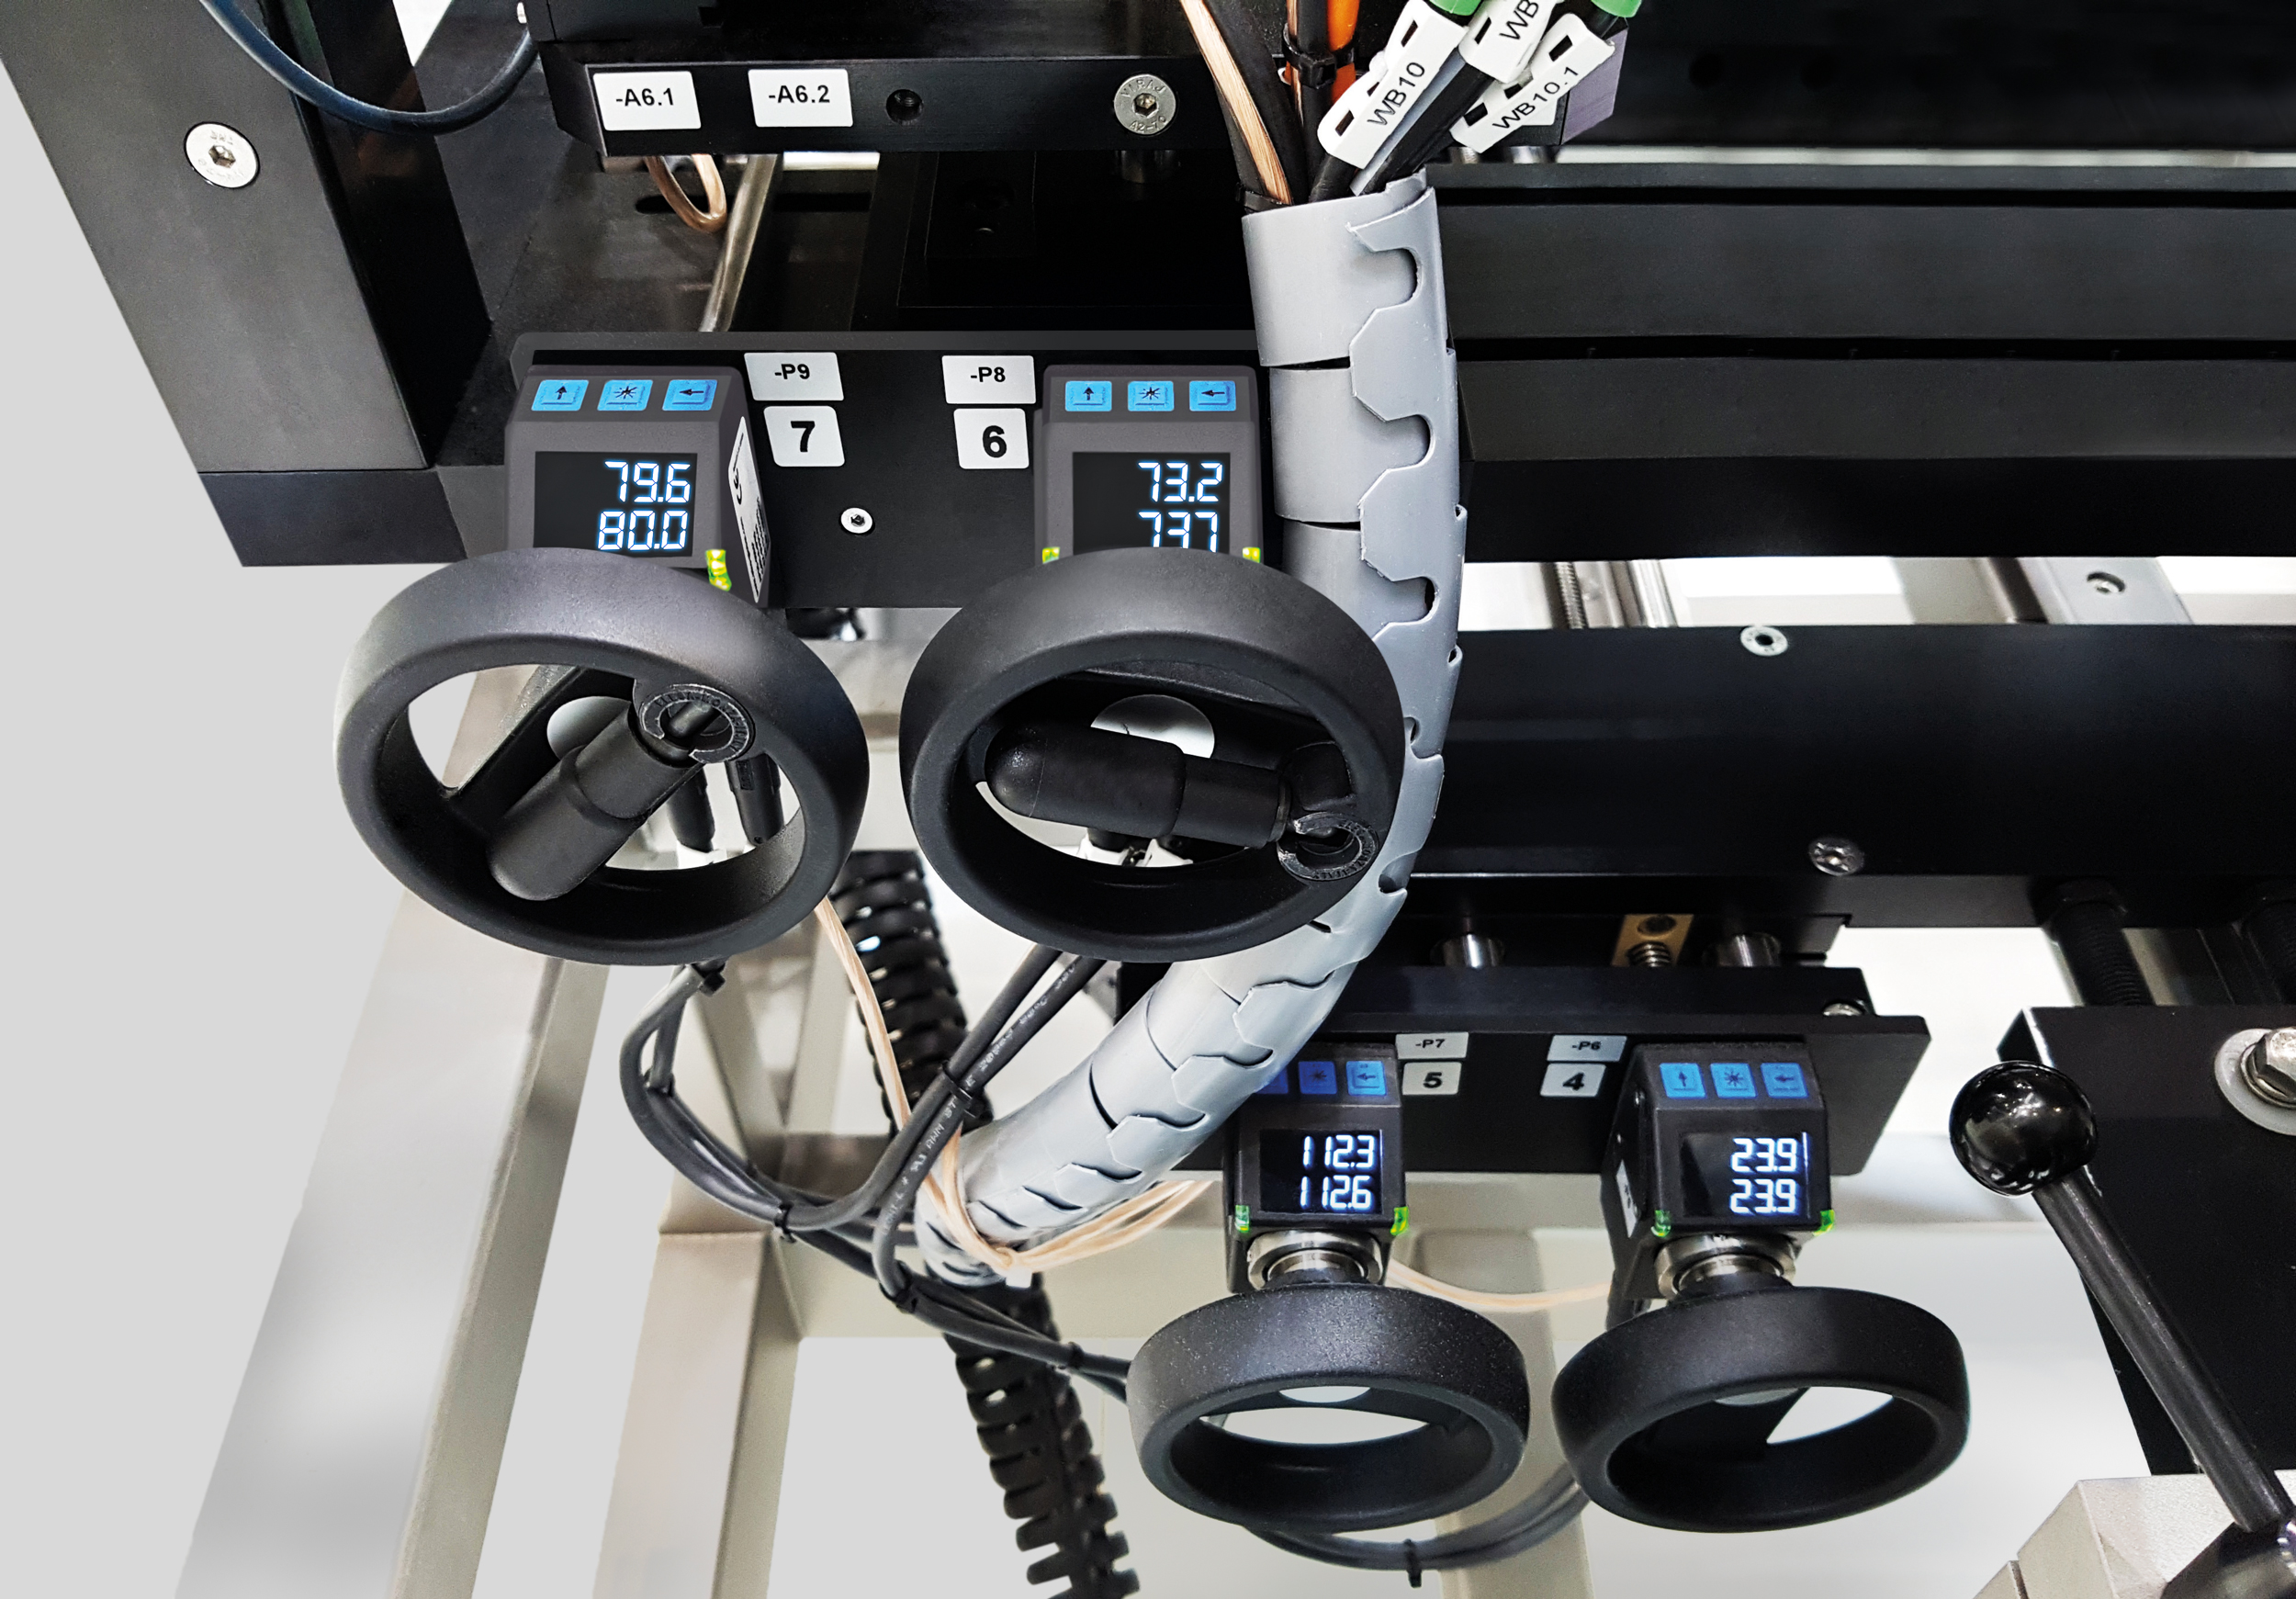 Bus-capable position indicators of type AP05 in operation on packaging machine